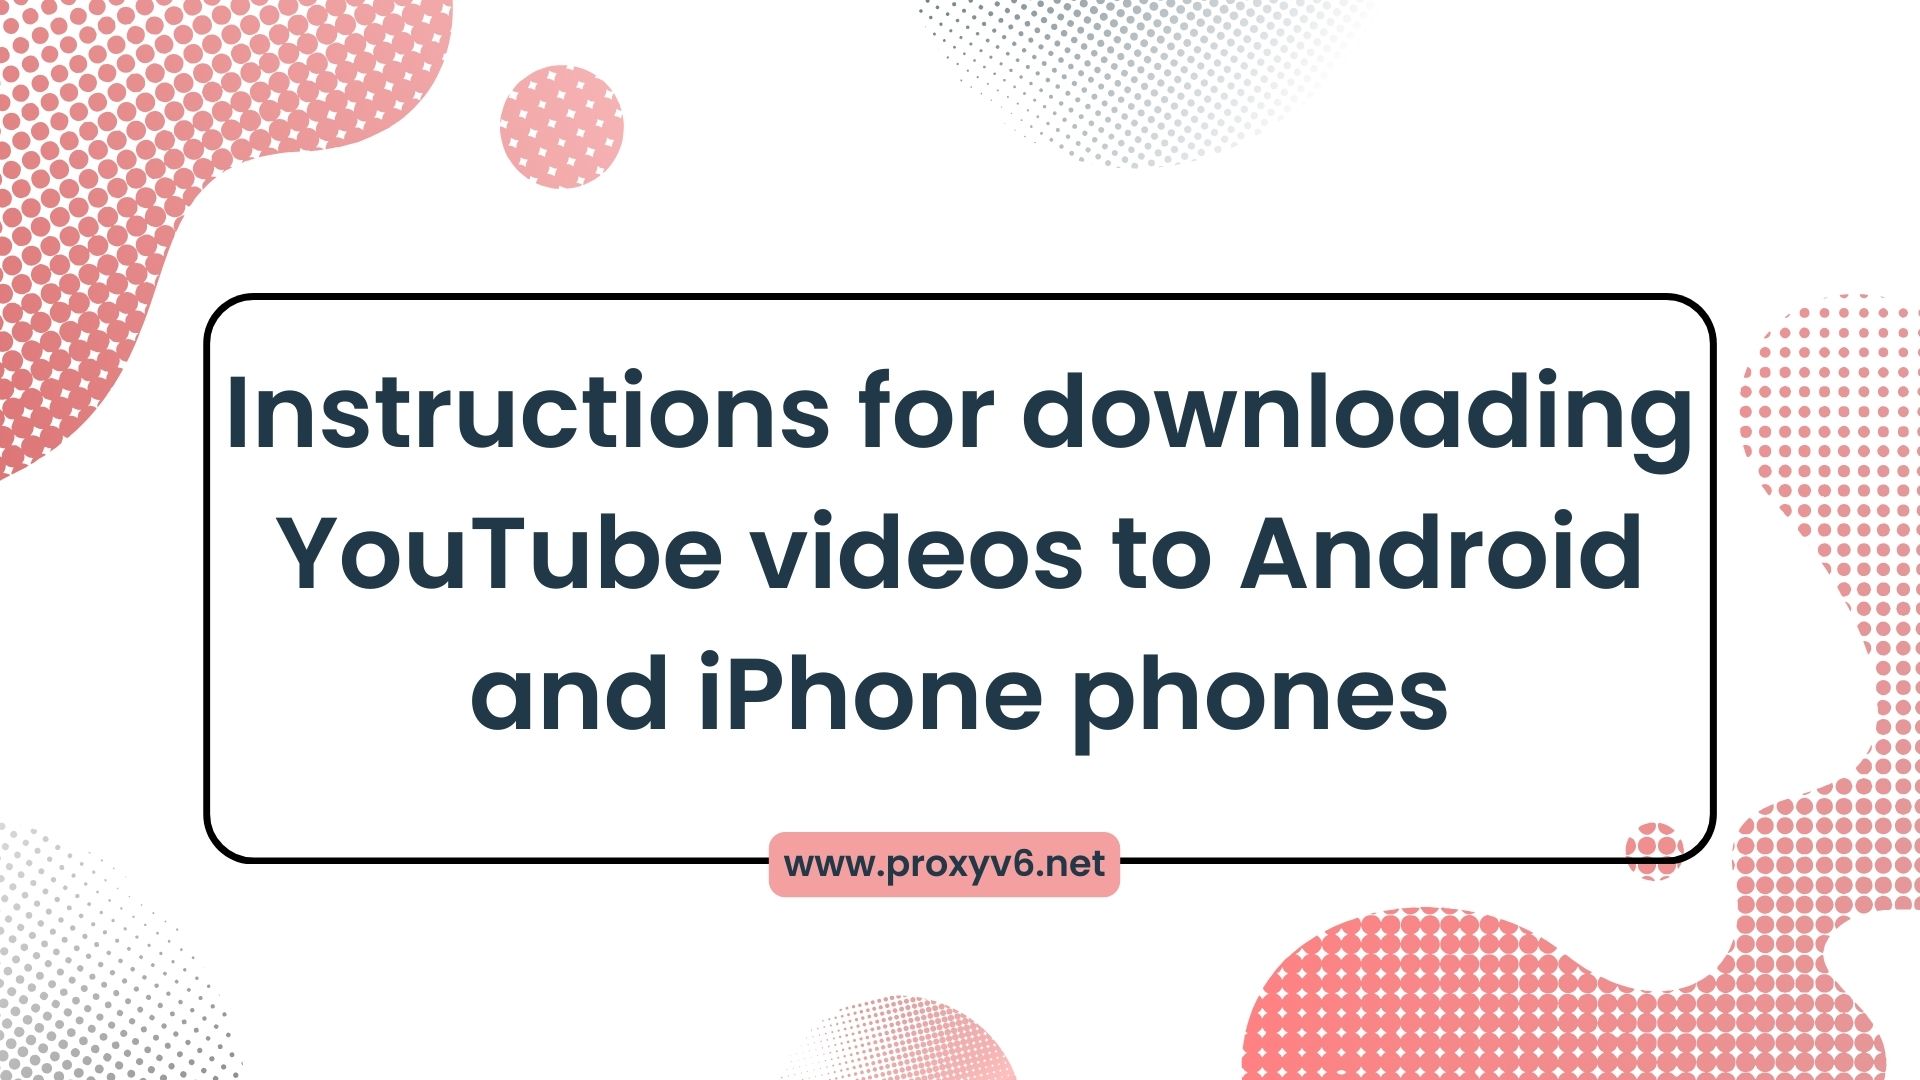 Instructions for downloading YouTube videos to Android and iPhone phones